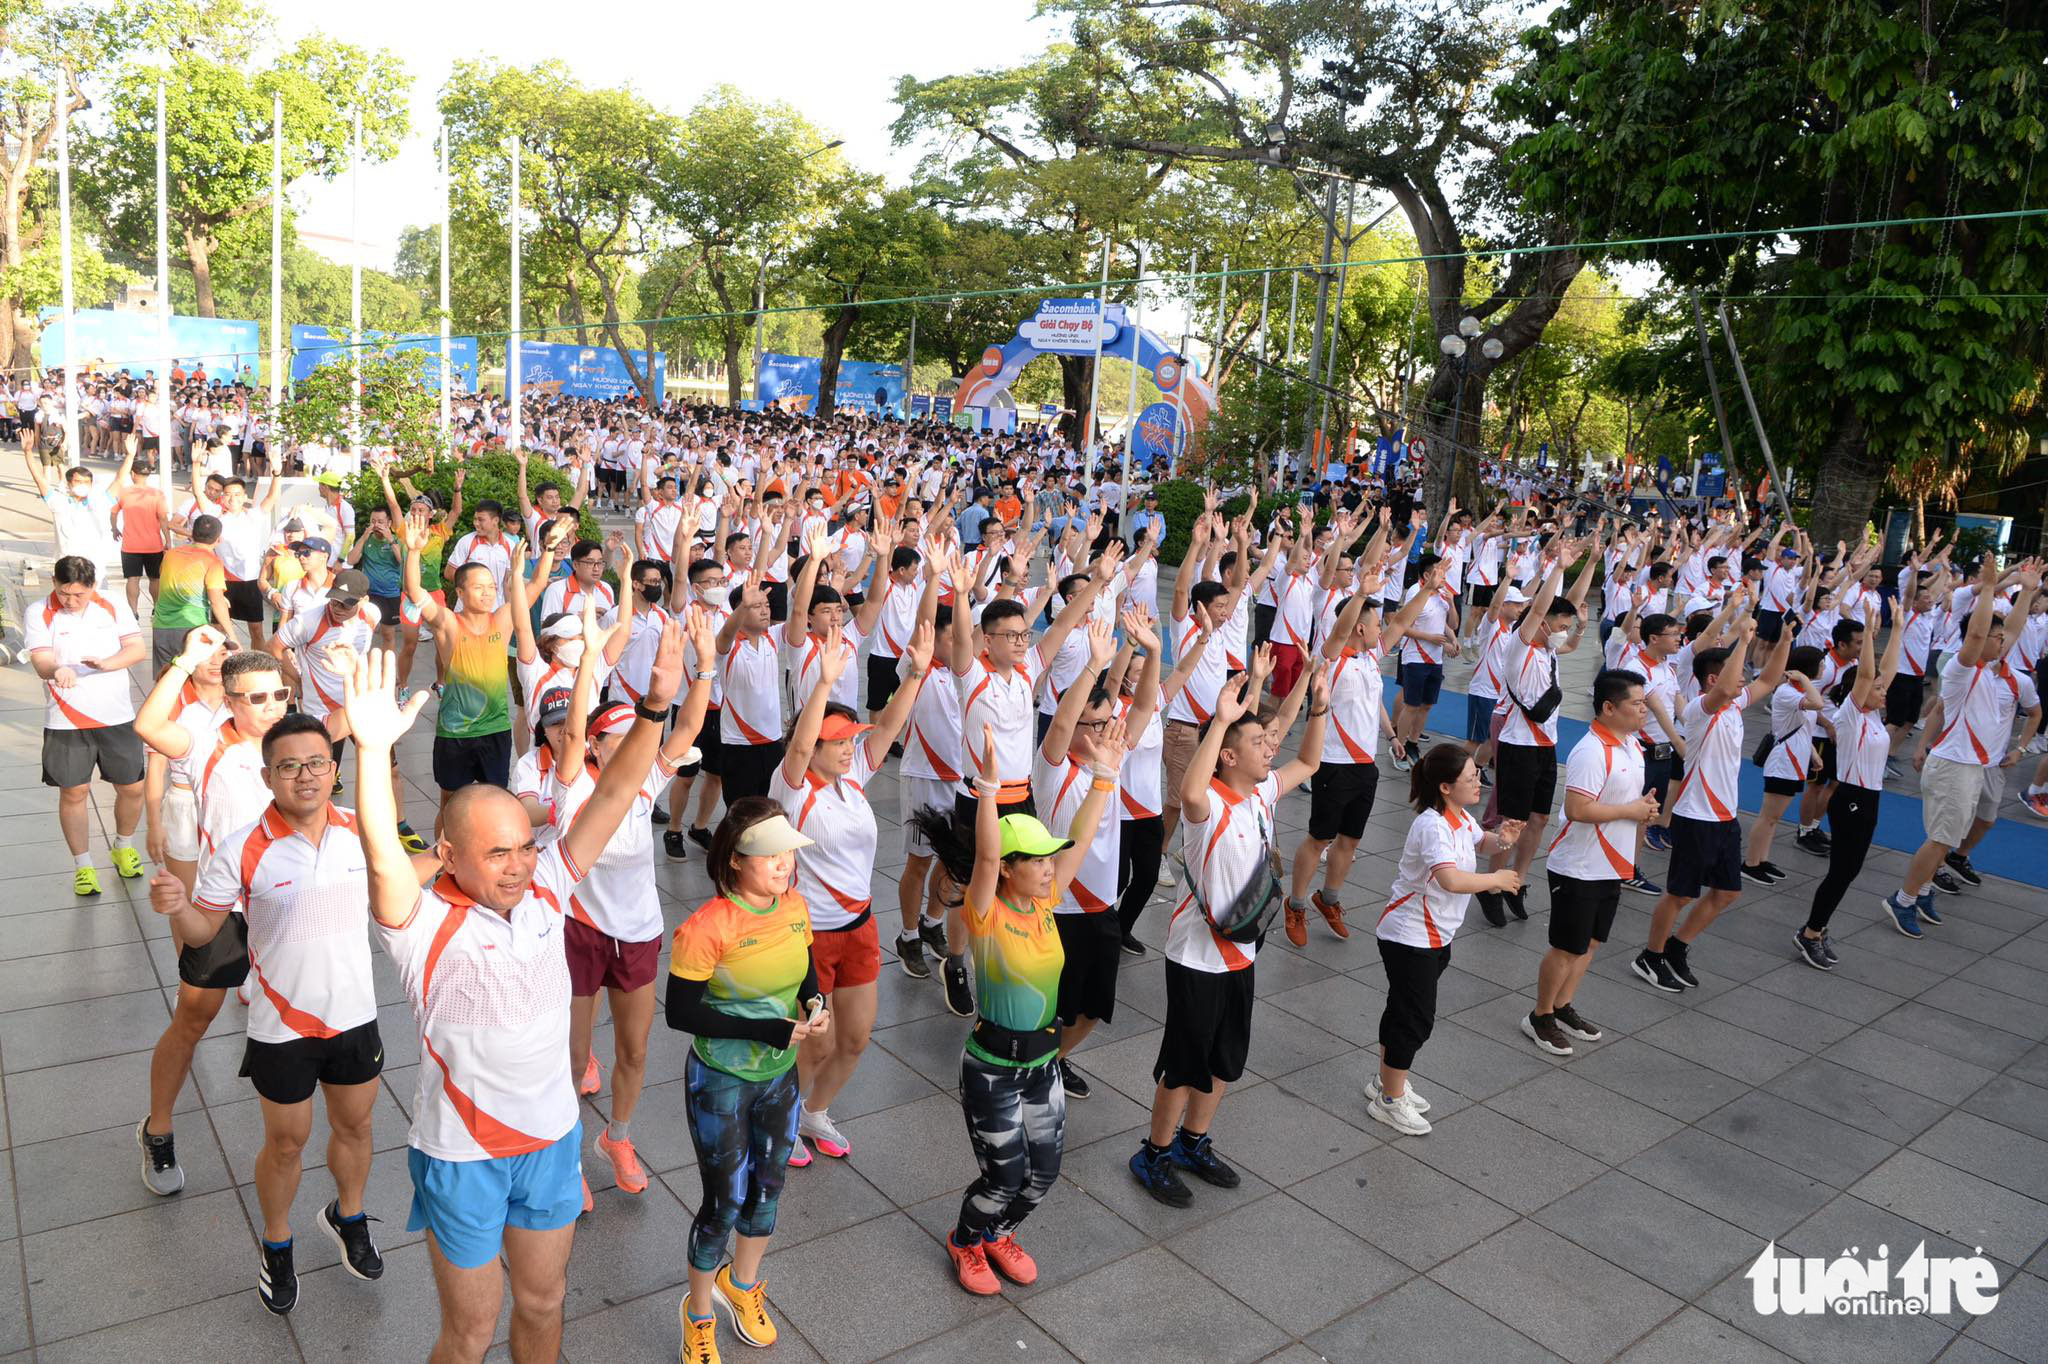 Participants warm up before the run at at Hoan Kiem Lake in Hanoi, June 19, 2022. Photo: T.T.D. / Tuoi Tre